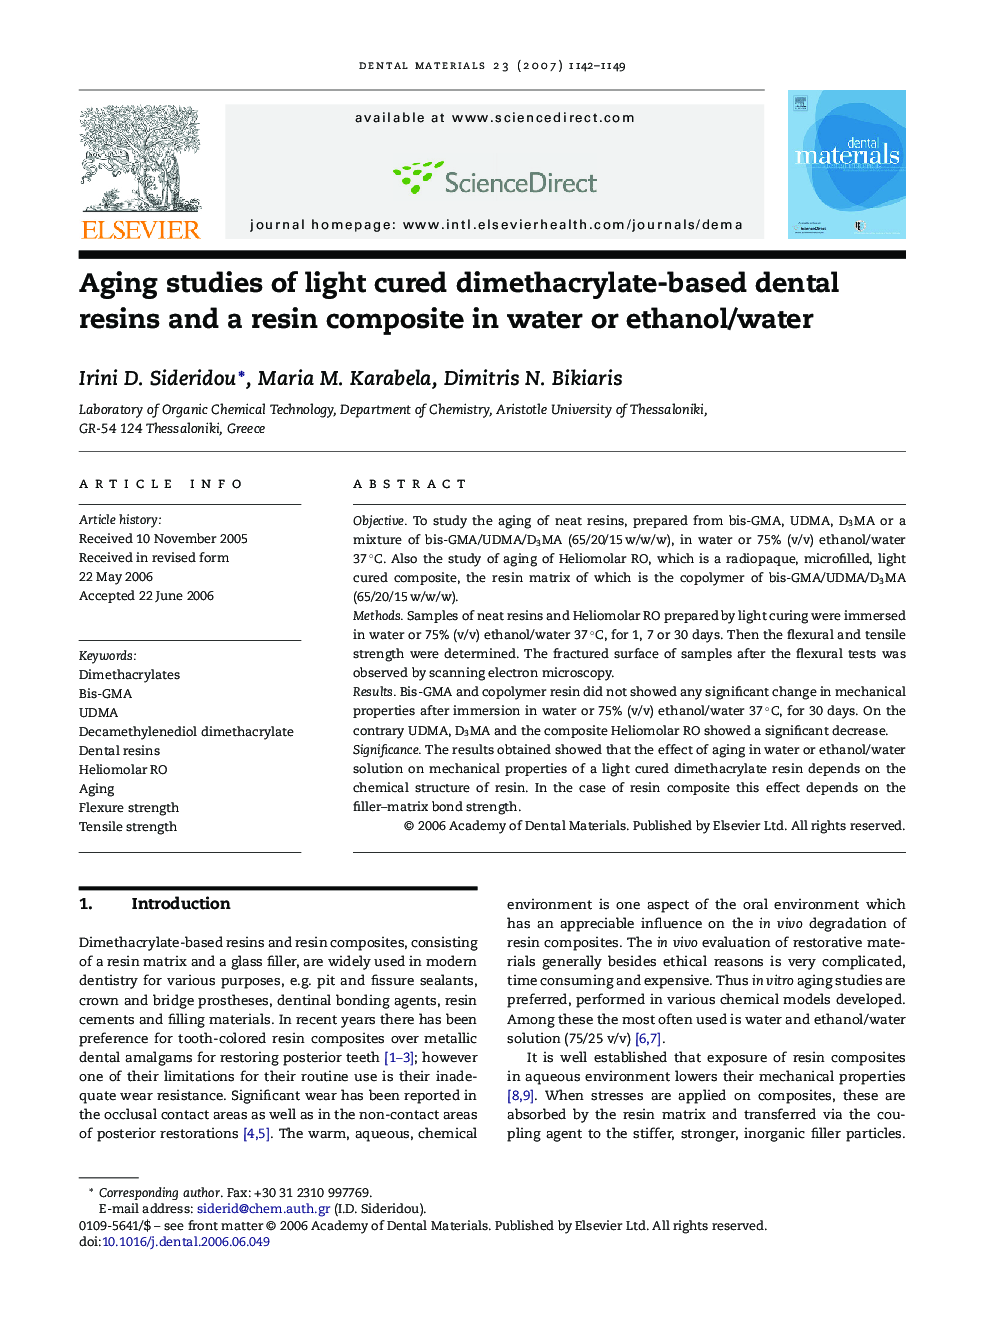 Aging studies of light cured dimethacrylate-based dental resins and a resin composite in water or ethanol/water